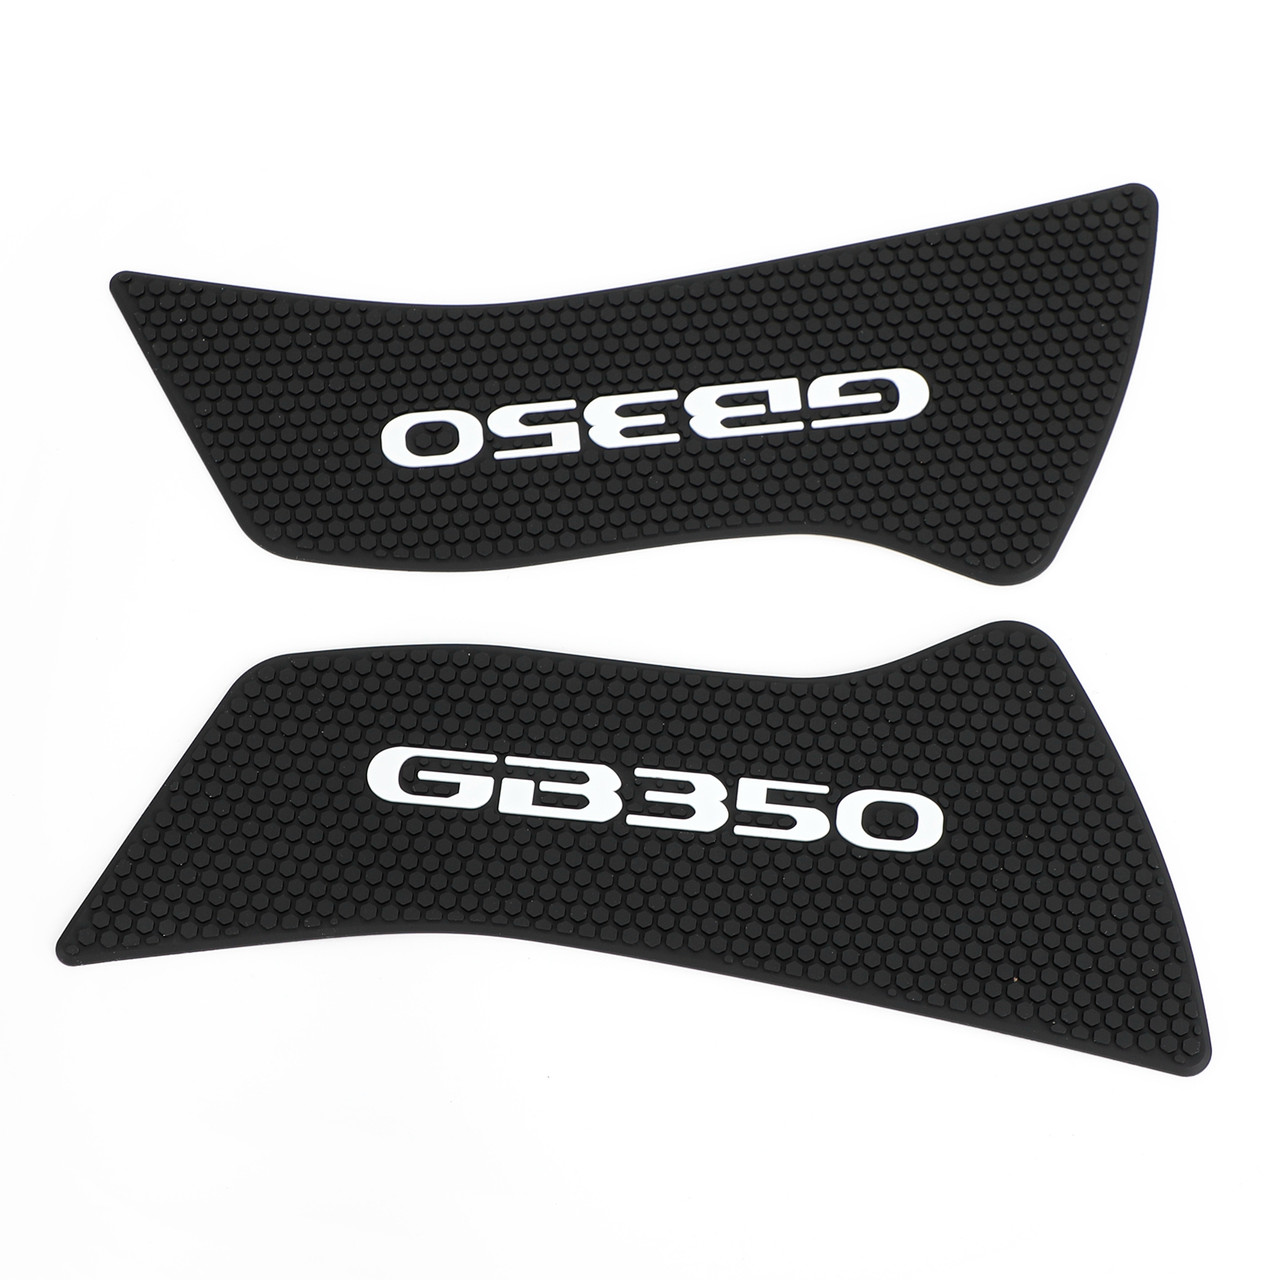 Side Tank Traction Pads Grip Protectors For Honda GB350 GB350S 2021 2022 Black